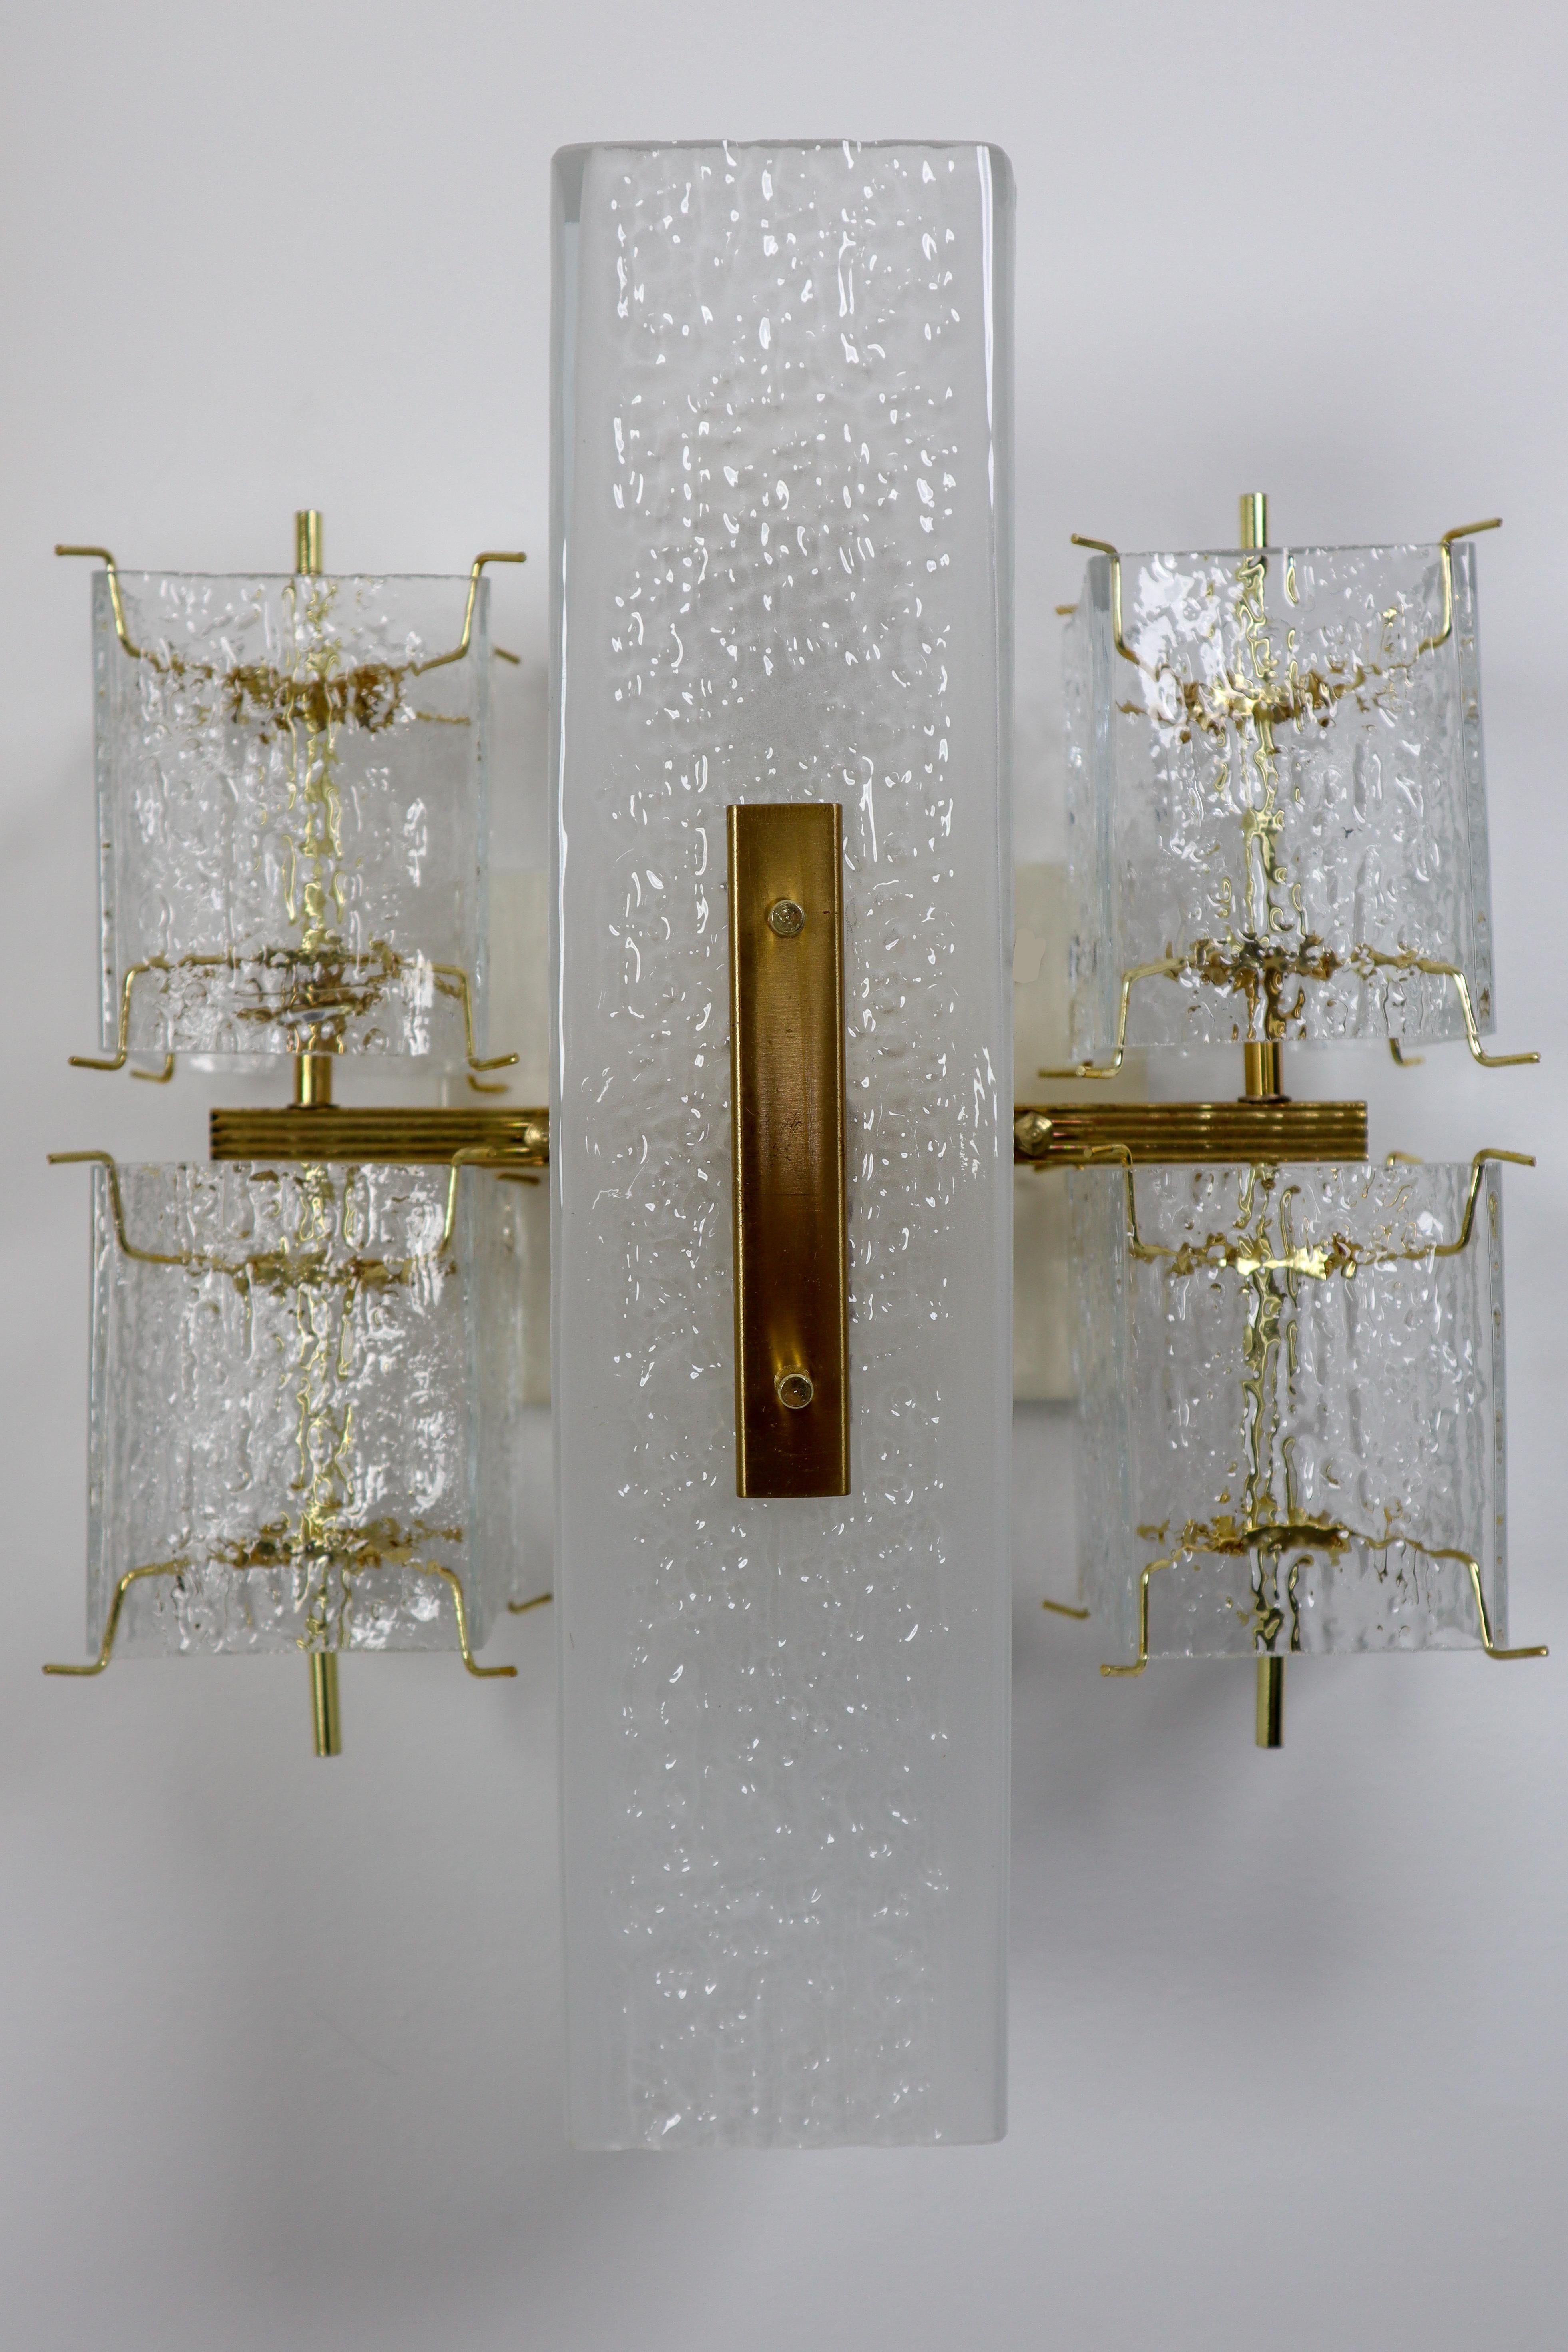 Eight midcentury wall lights, in glass and brass, Europe, 1970s. 

This elegant square wall lights features four small rectangular structured glass shades and a rectangular opaque middle section. The frame is made of brass and holds small brass